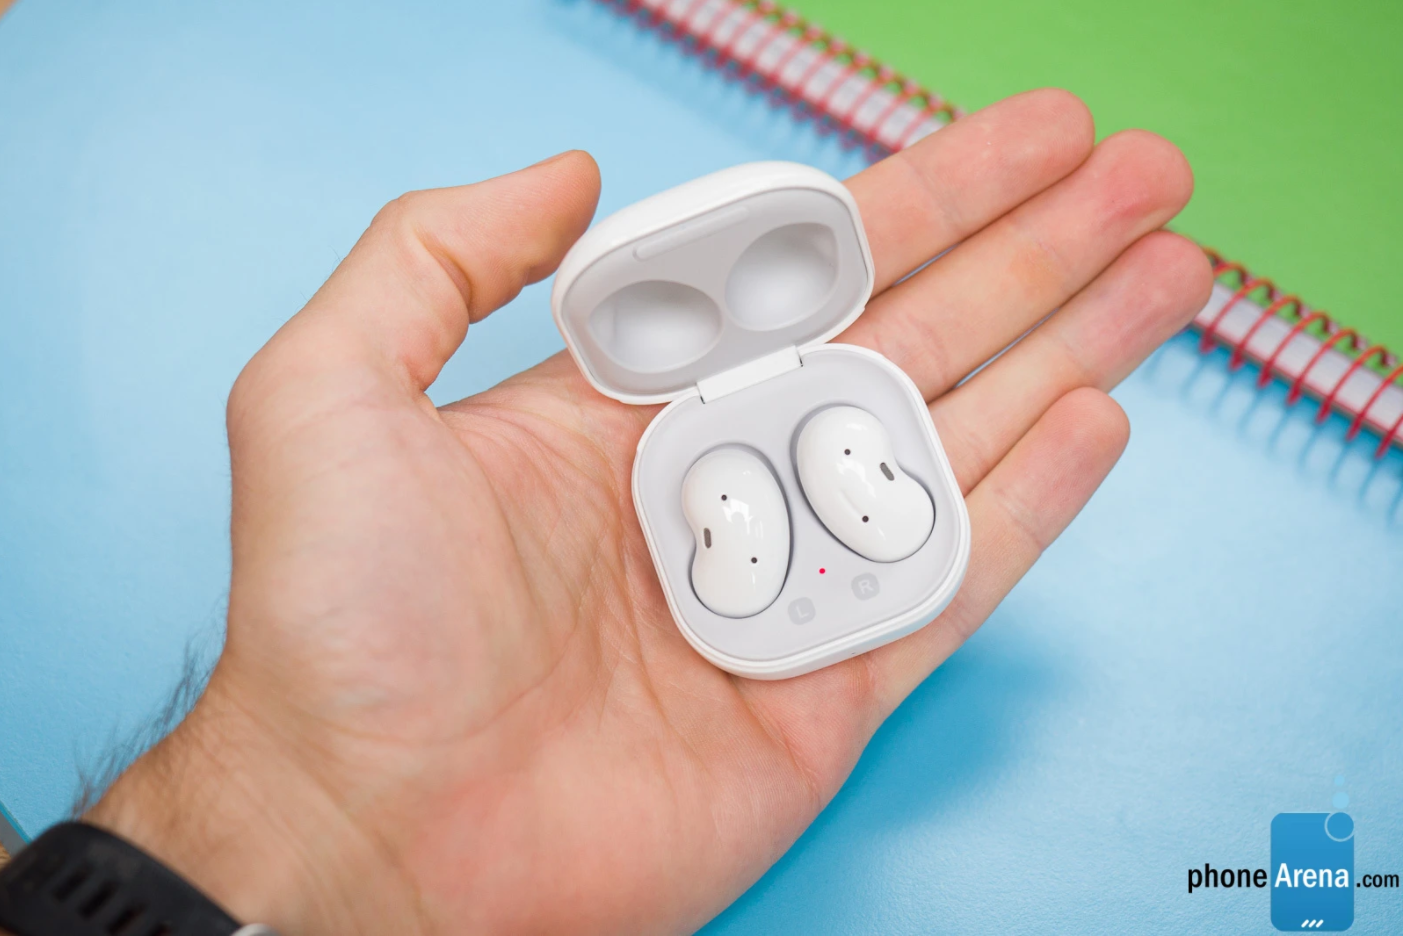 The best earbuds for phone calls you can find - updated October 2022